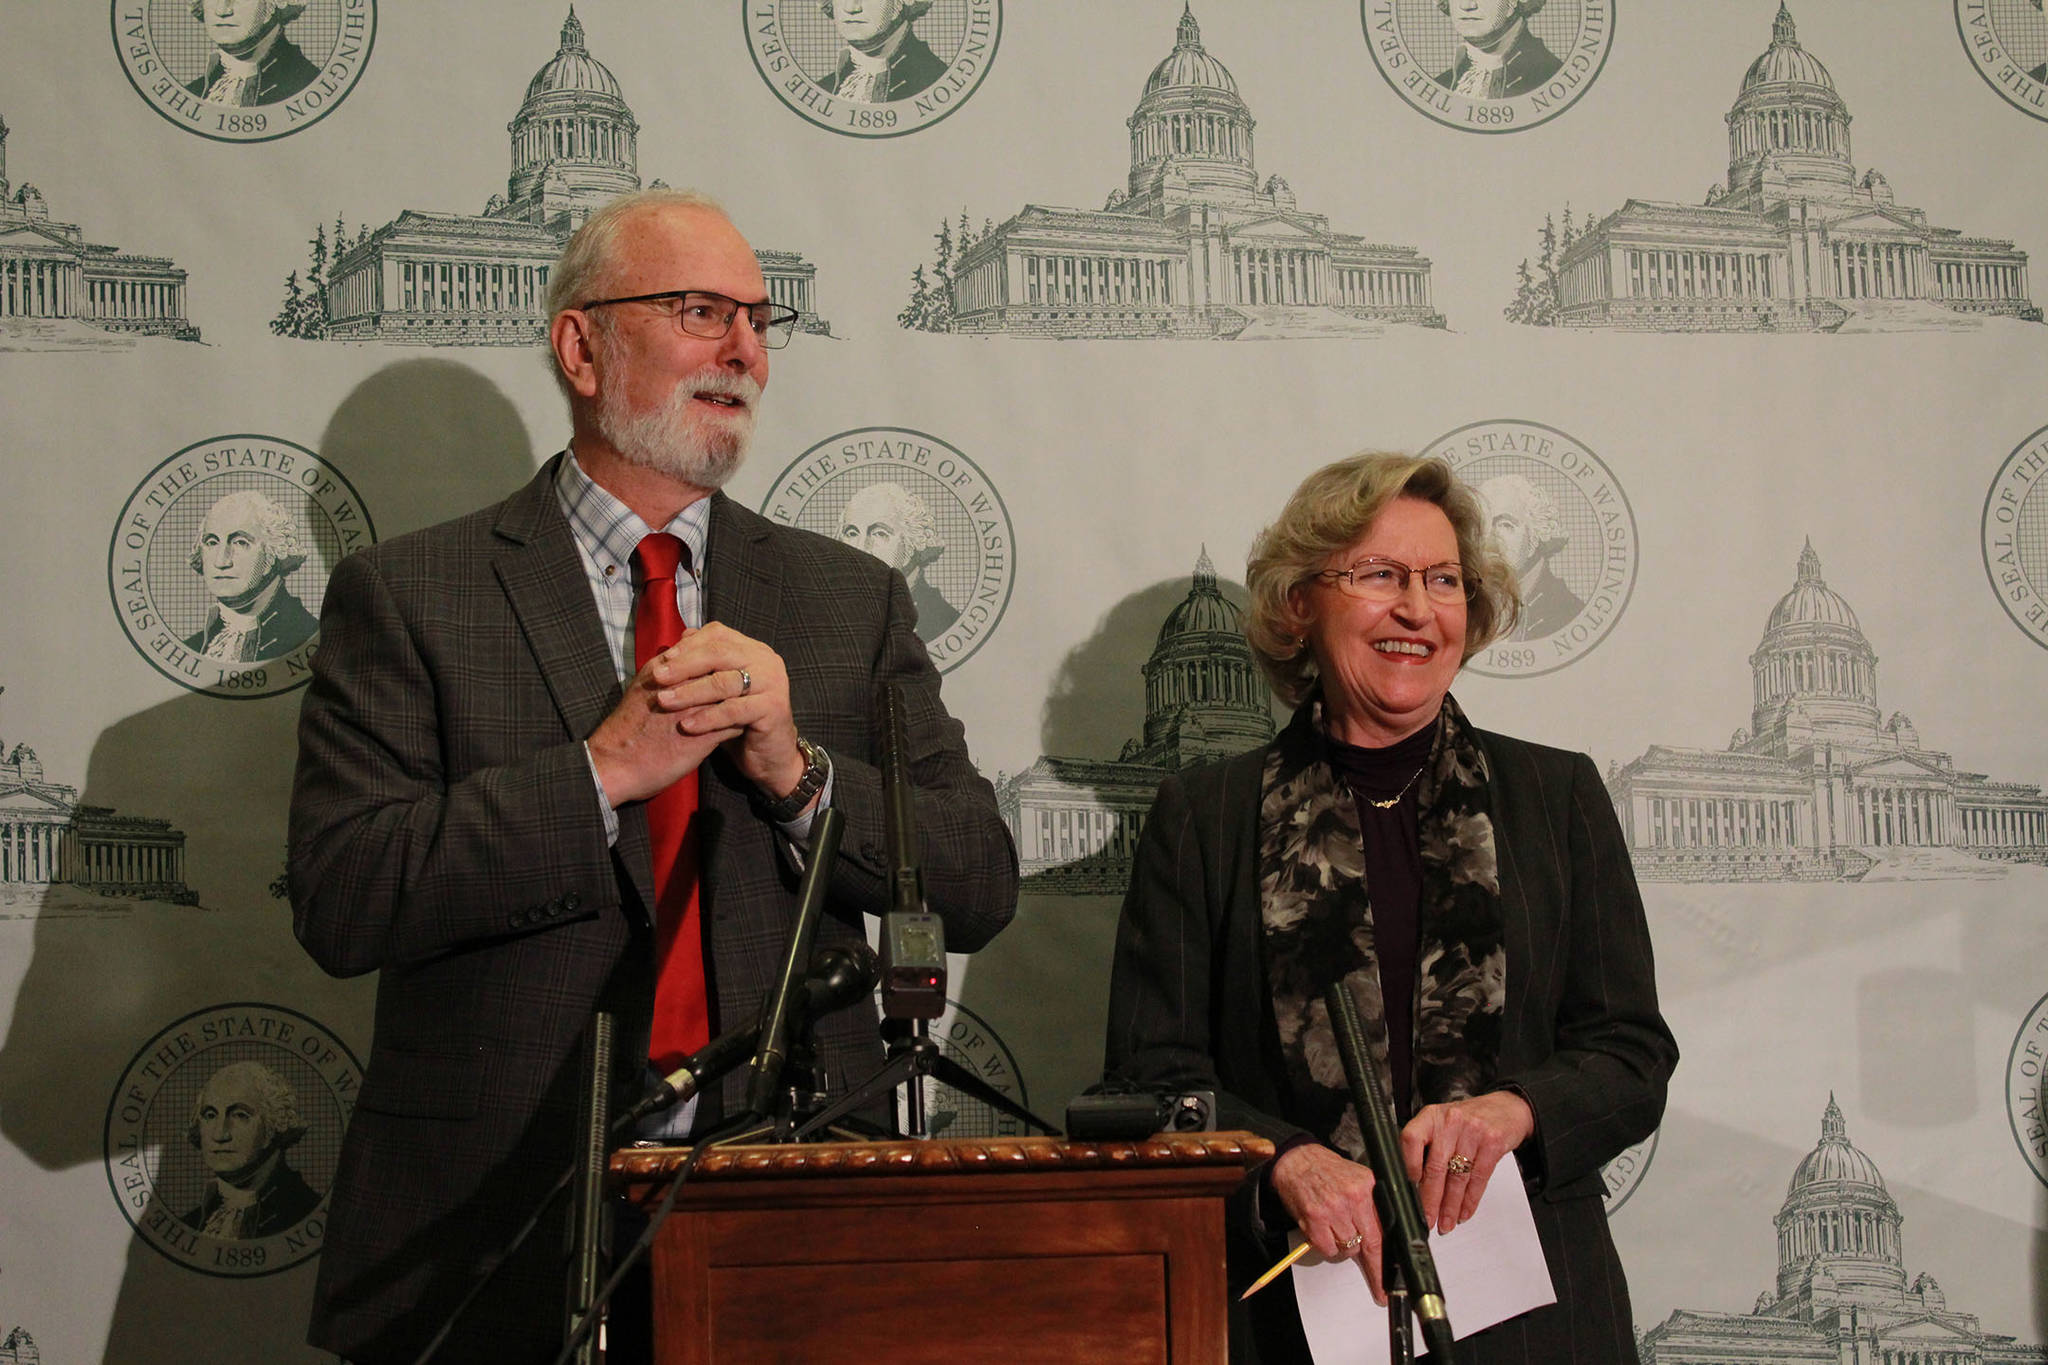 Senators Phil Fortunato, R-Auburn, and Barbara Bailey, R-Oak Harbor, hosted a press conference on Wednesday to introduce their bills meant to increase school safety and mental health awareness. Photo by Taylor McAvoy